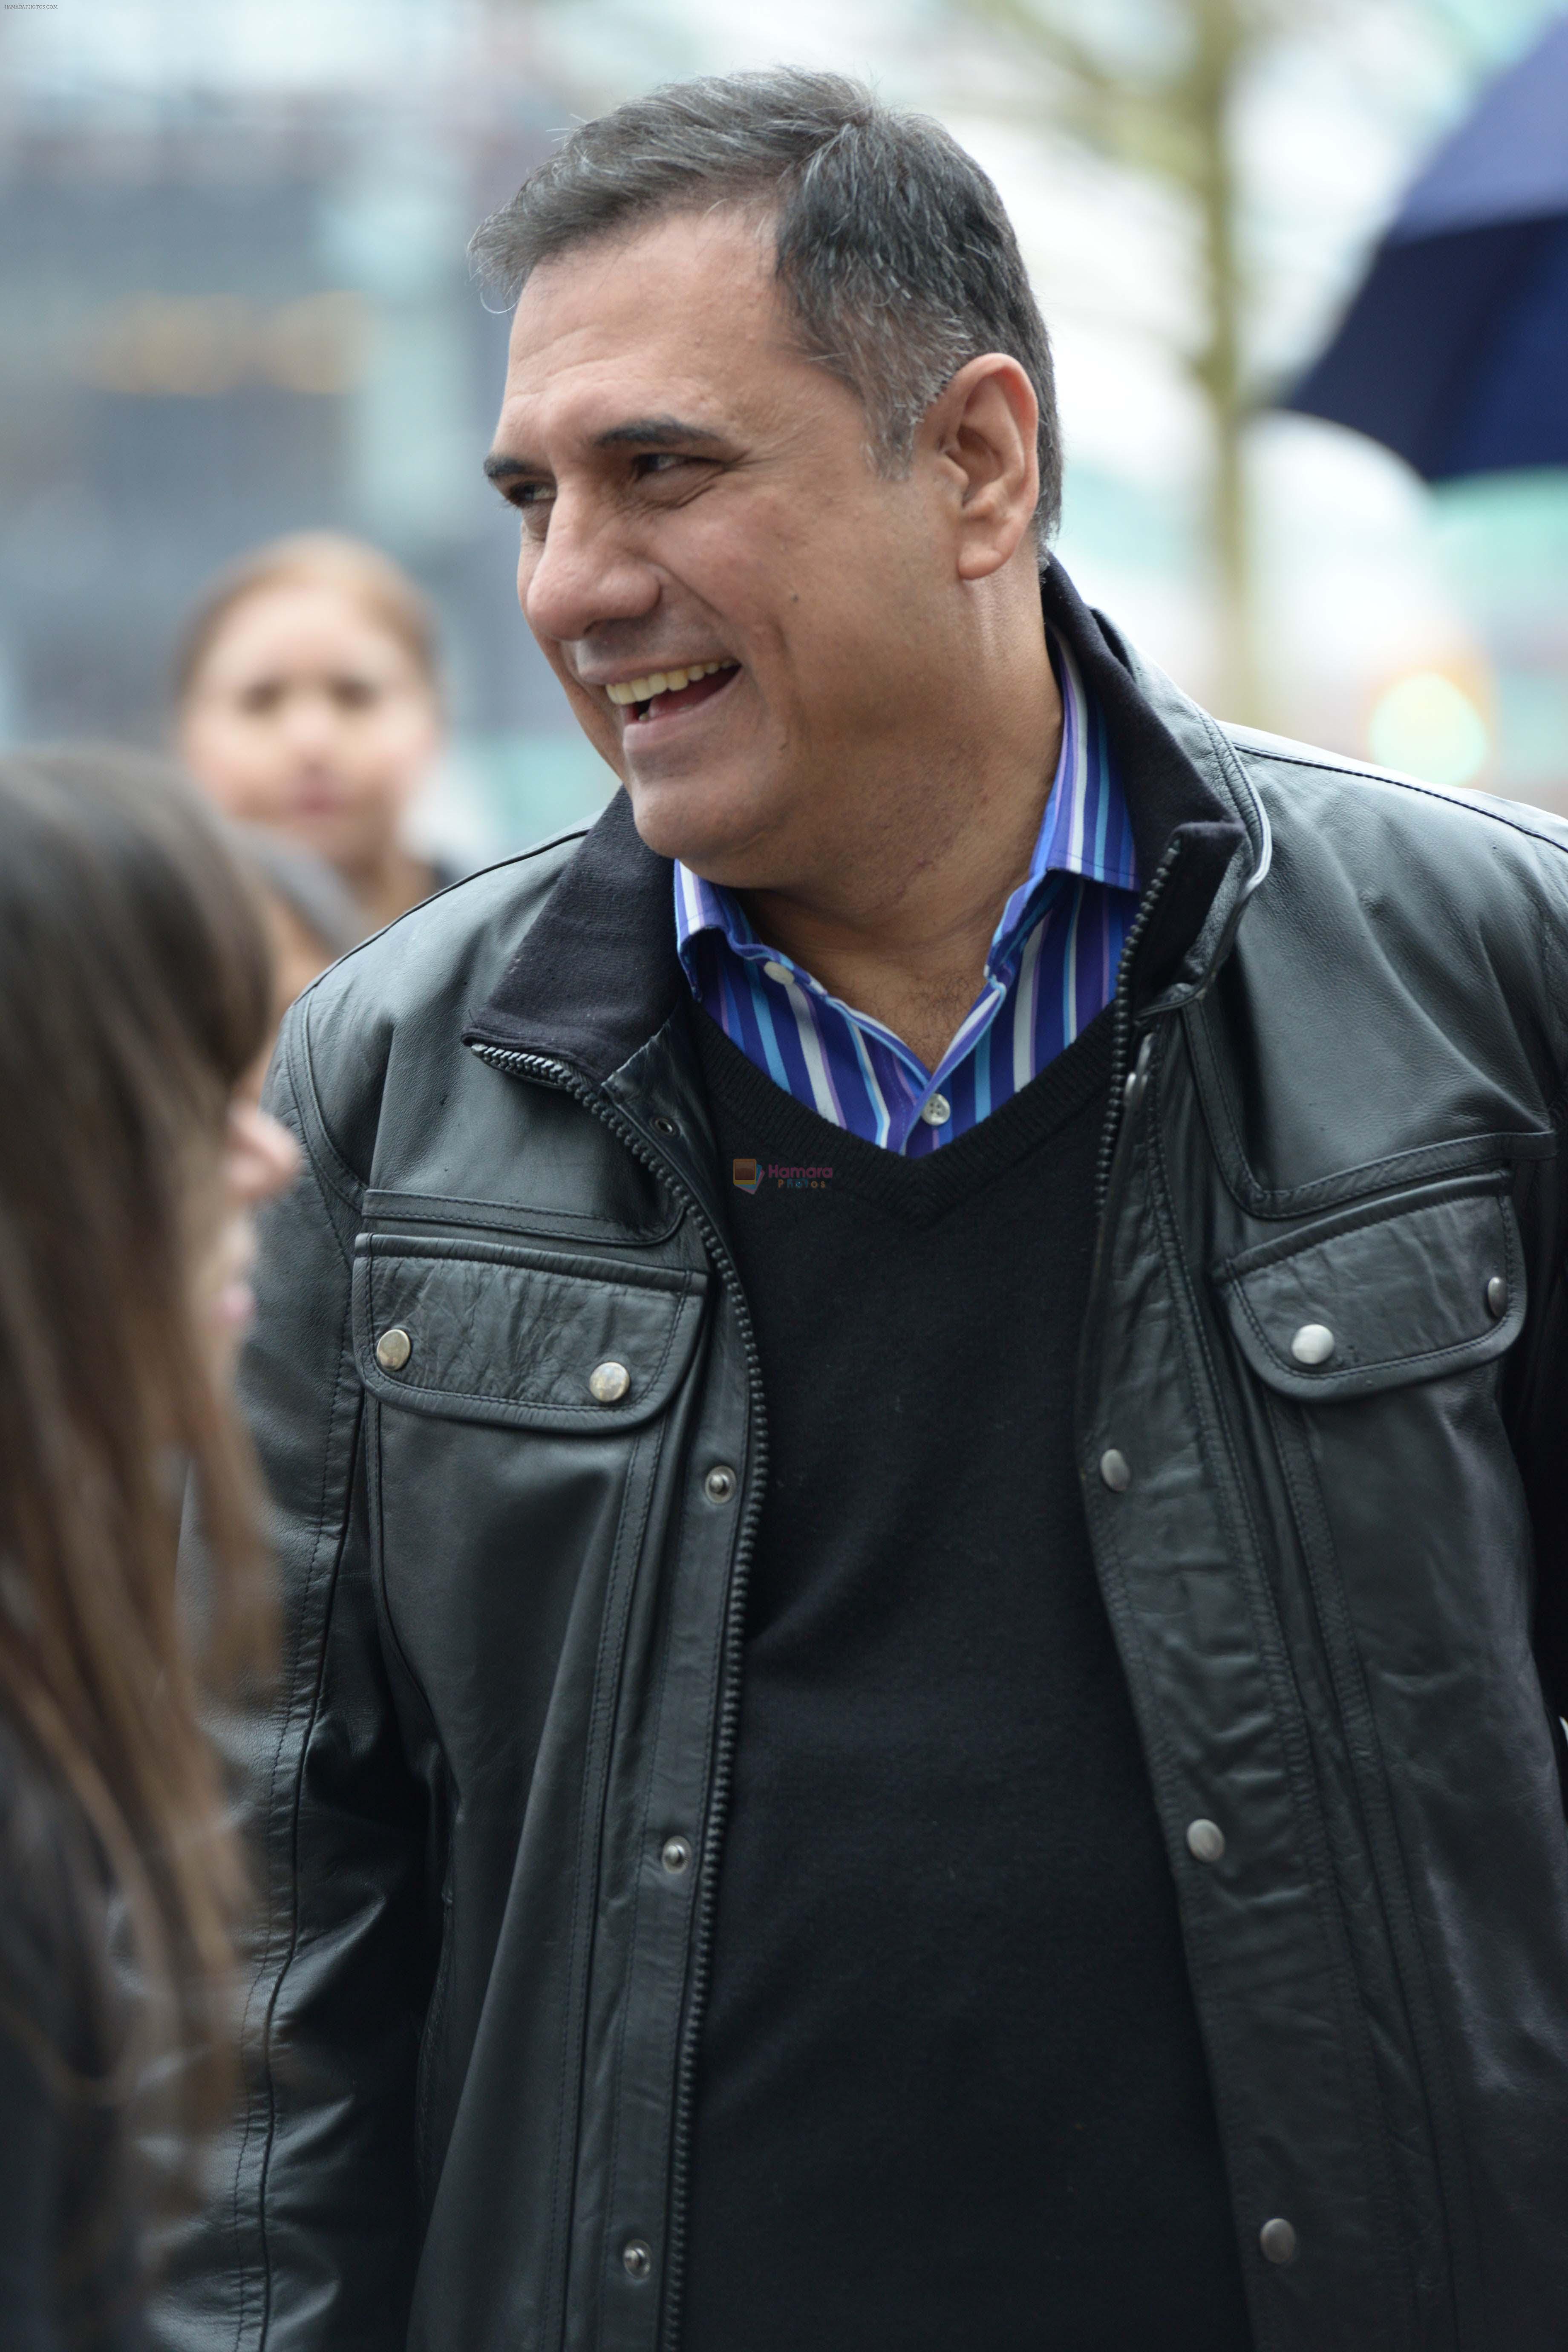 Boman Irani arrive in Vancouver for TOIFA 2013 on 4th April 2013